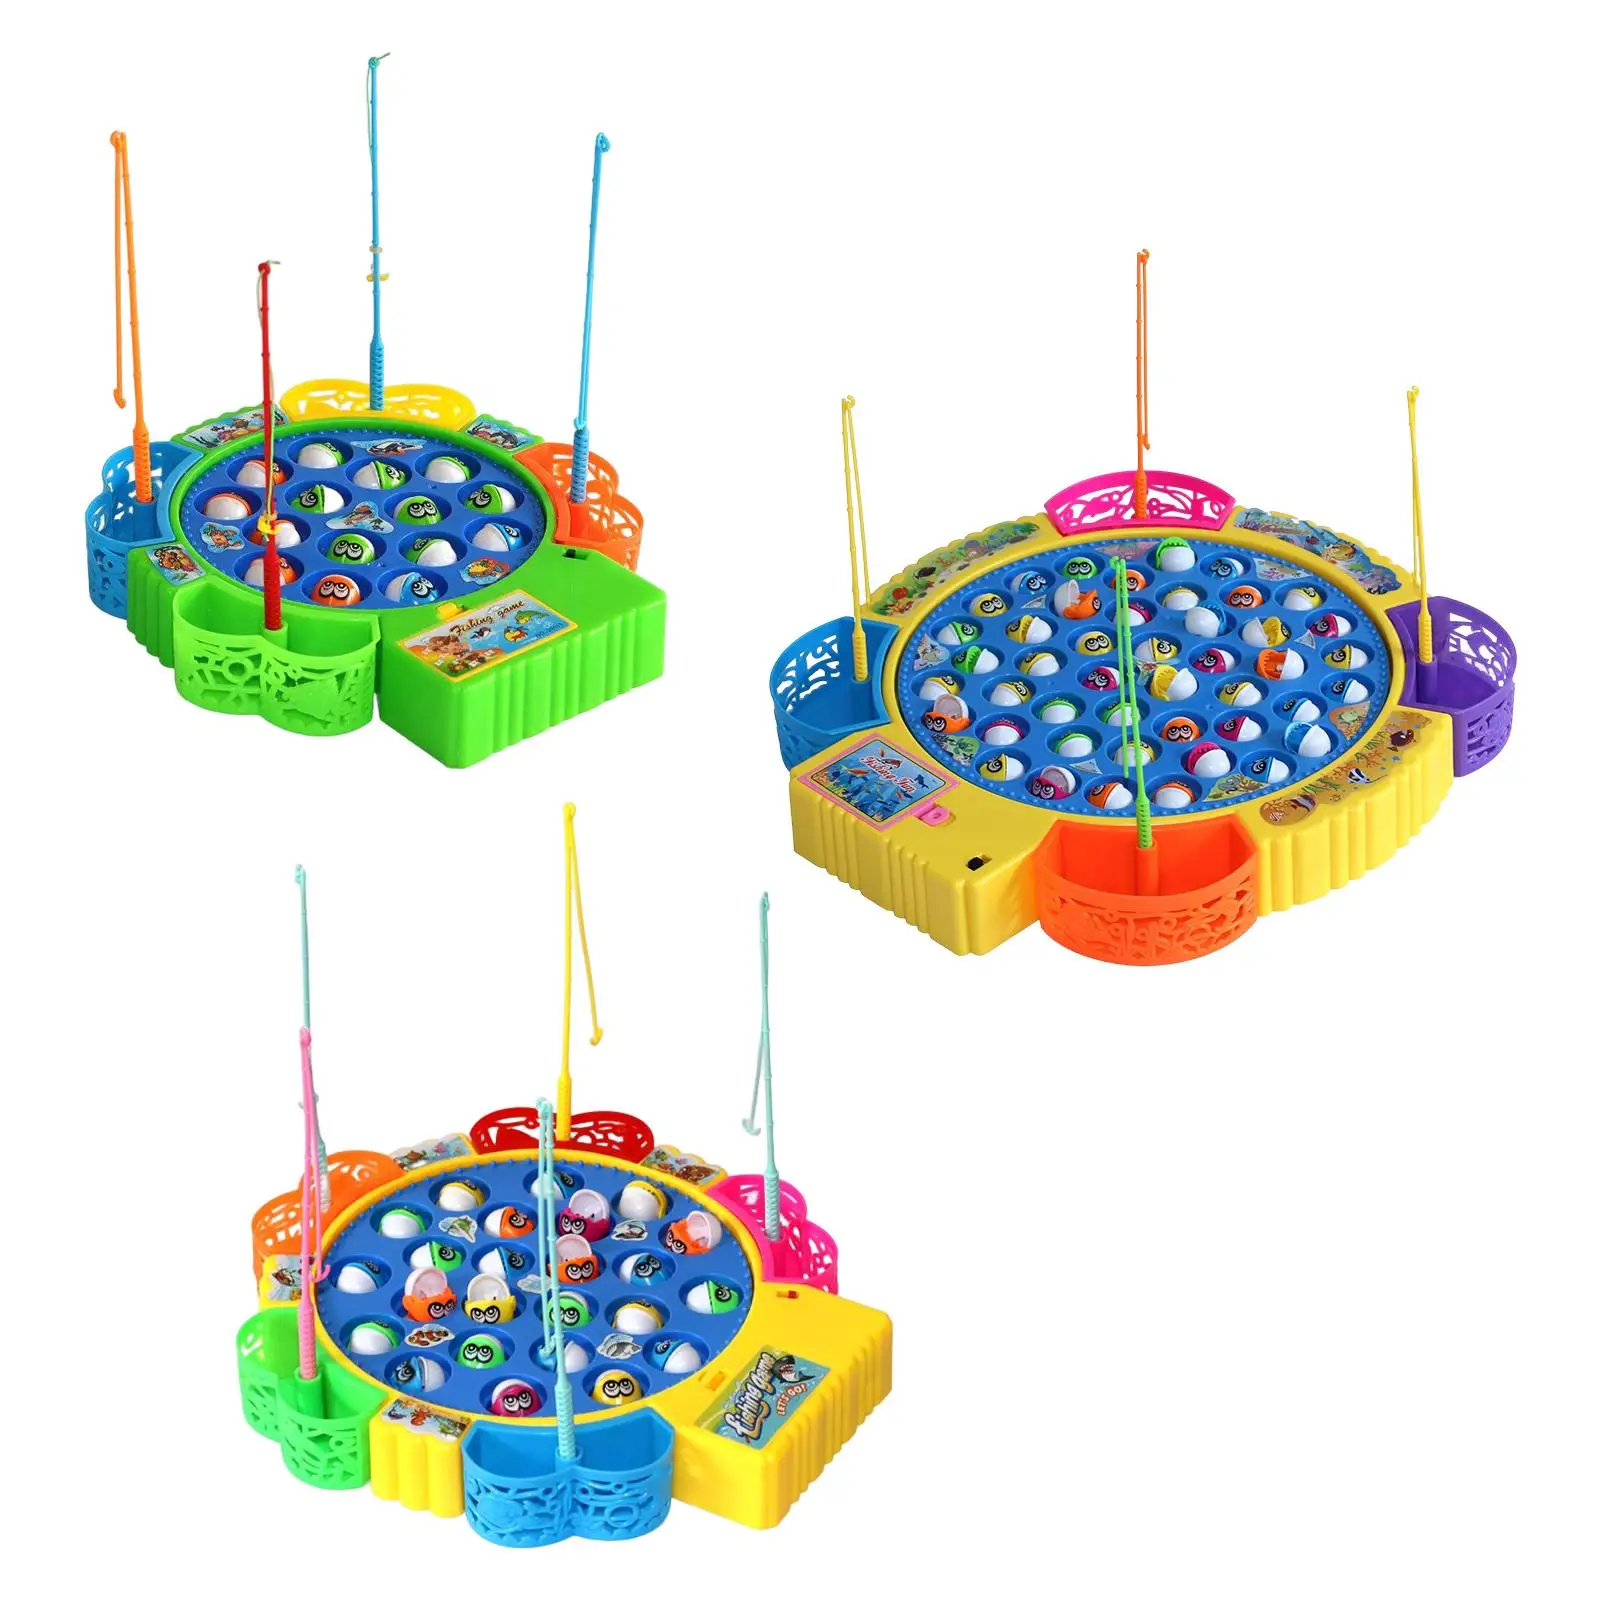 Rotating Fishing Game Kids toy, kids Fishing Toy for Early Learning Toy